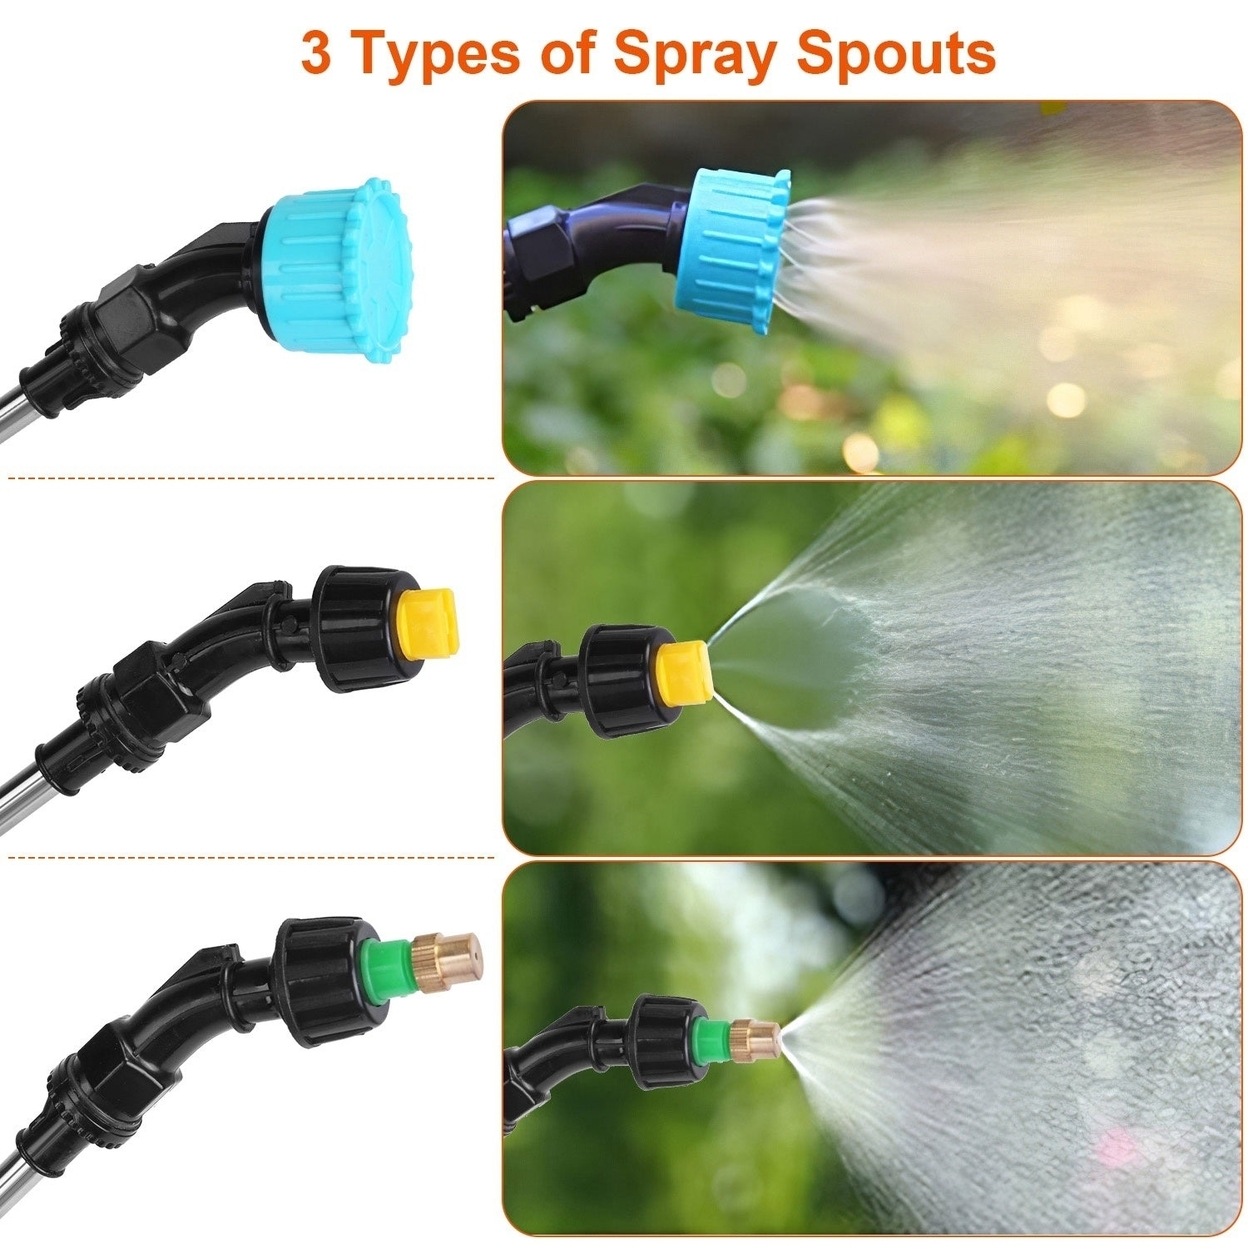 Dsermall 5L Electric Plant Sprayer Telescopic Rechargeable Garden Sprayer Automatic Handheld Sprayer with 3 Spray Spouts Shoulder Strap